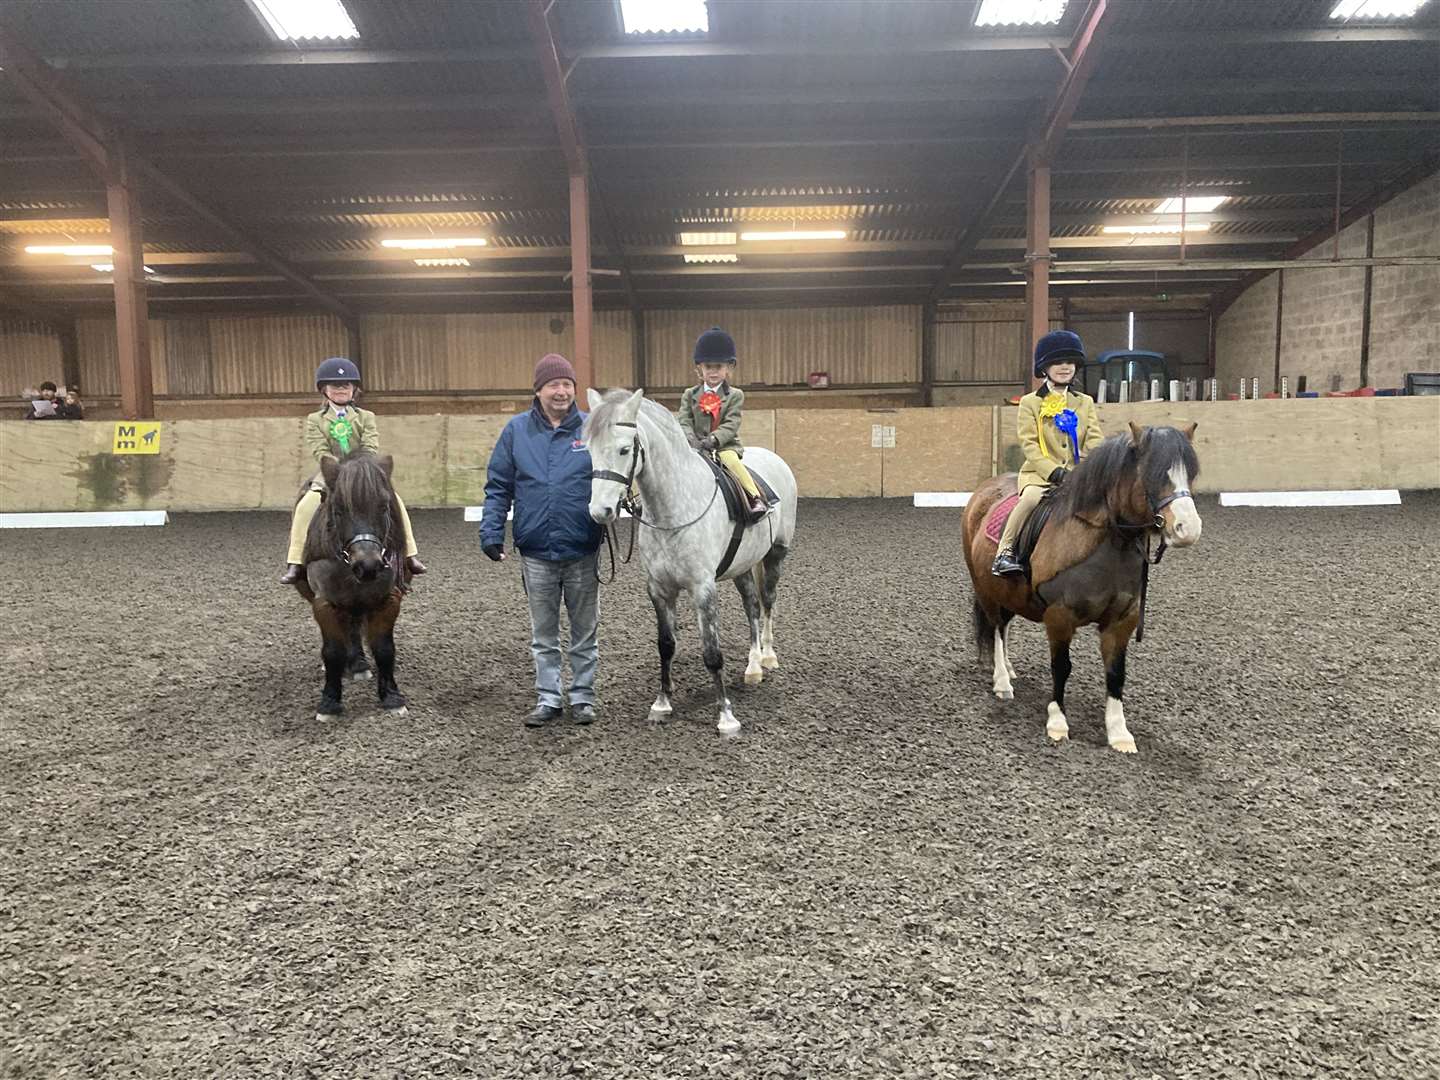 Some of the younger riders from the first test of the day along with the judge. From left to right: Lois Manson, Stephen Cruickshank, Zara Manson and Blaire Patterson.